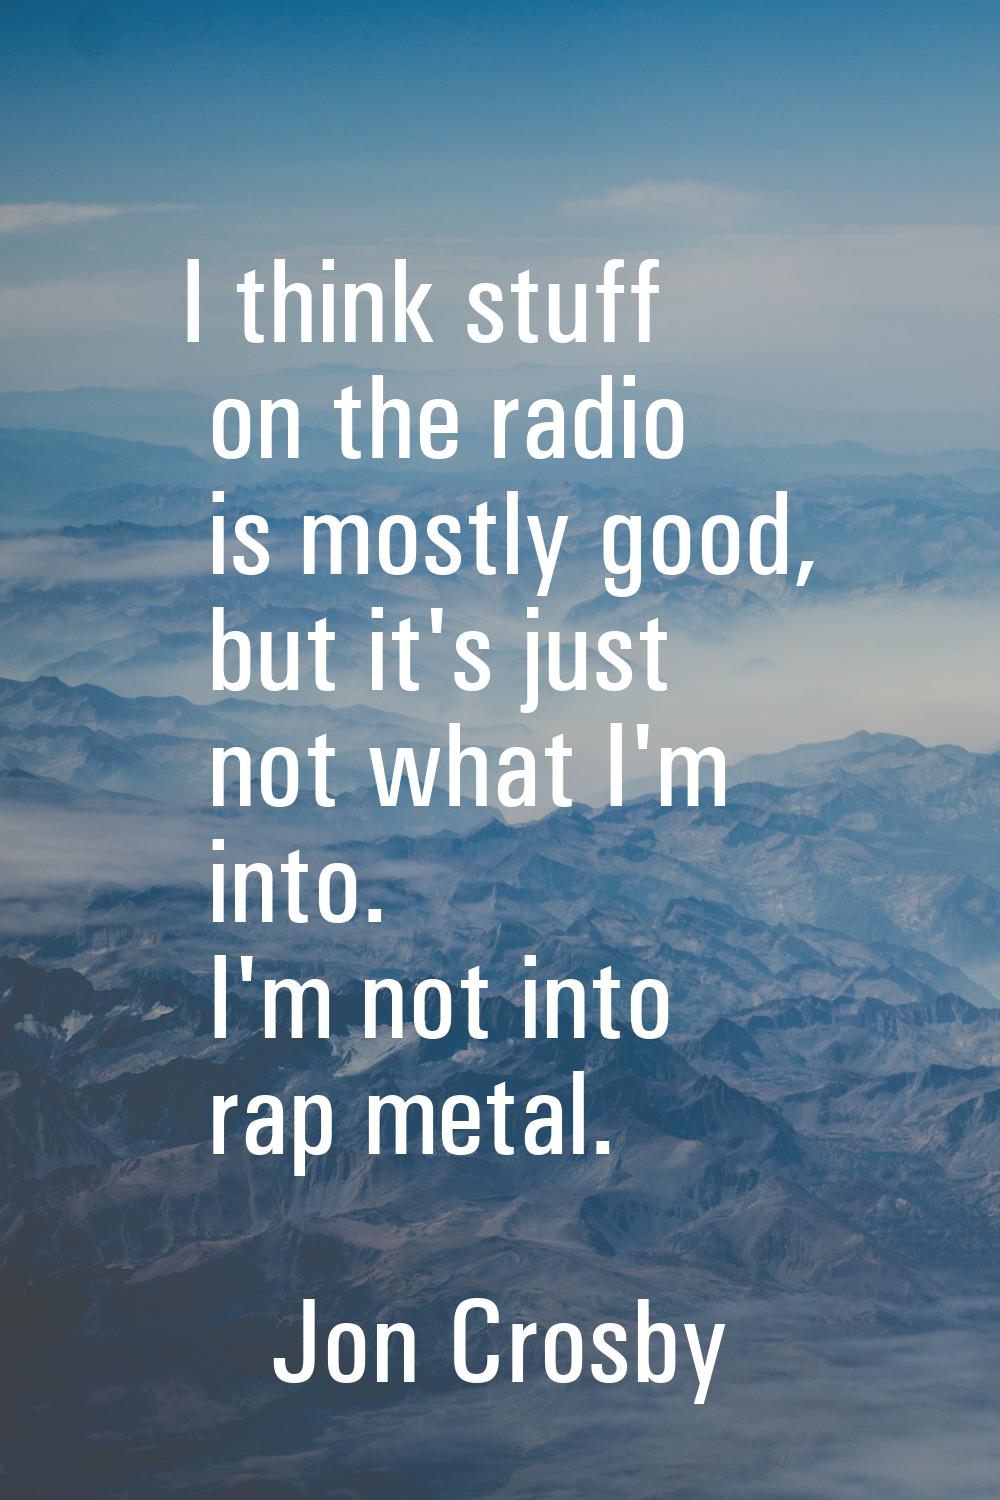 I think stuff on the radio is mostly good, but it's just not what I'm into. I'm not into rap metal.